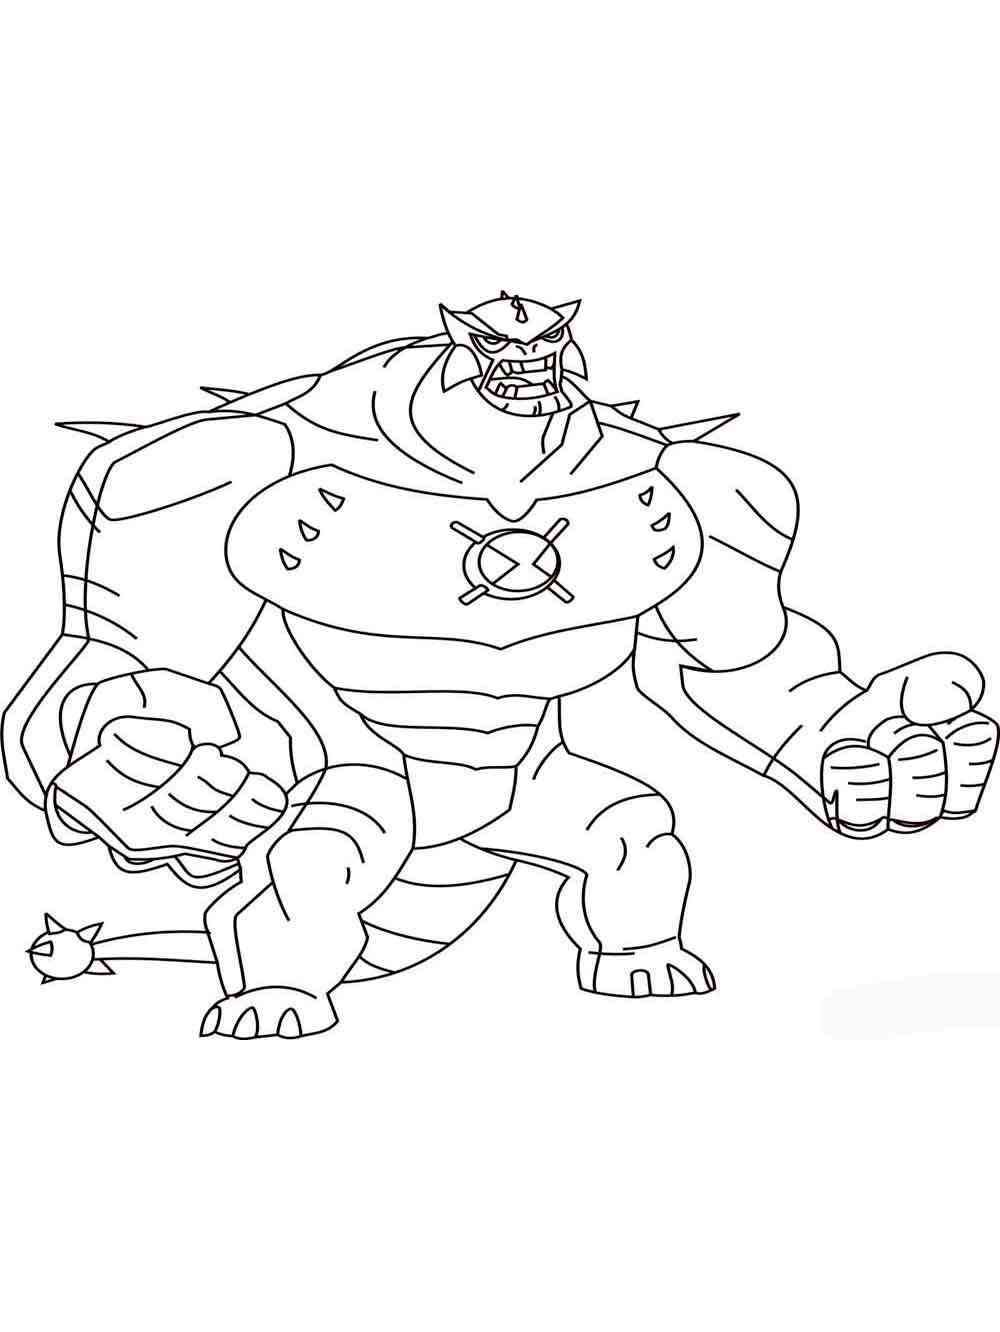 Ultimate Humungousaur from Ben 10 coloring page